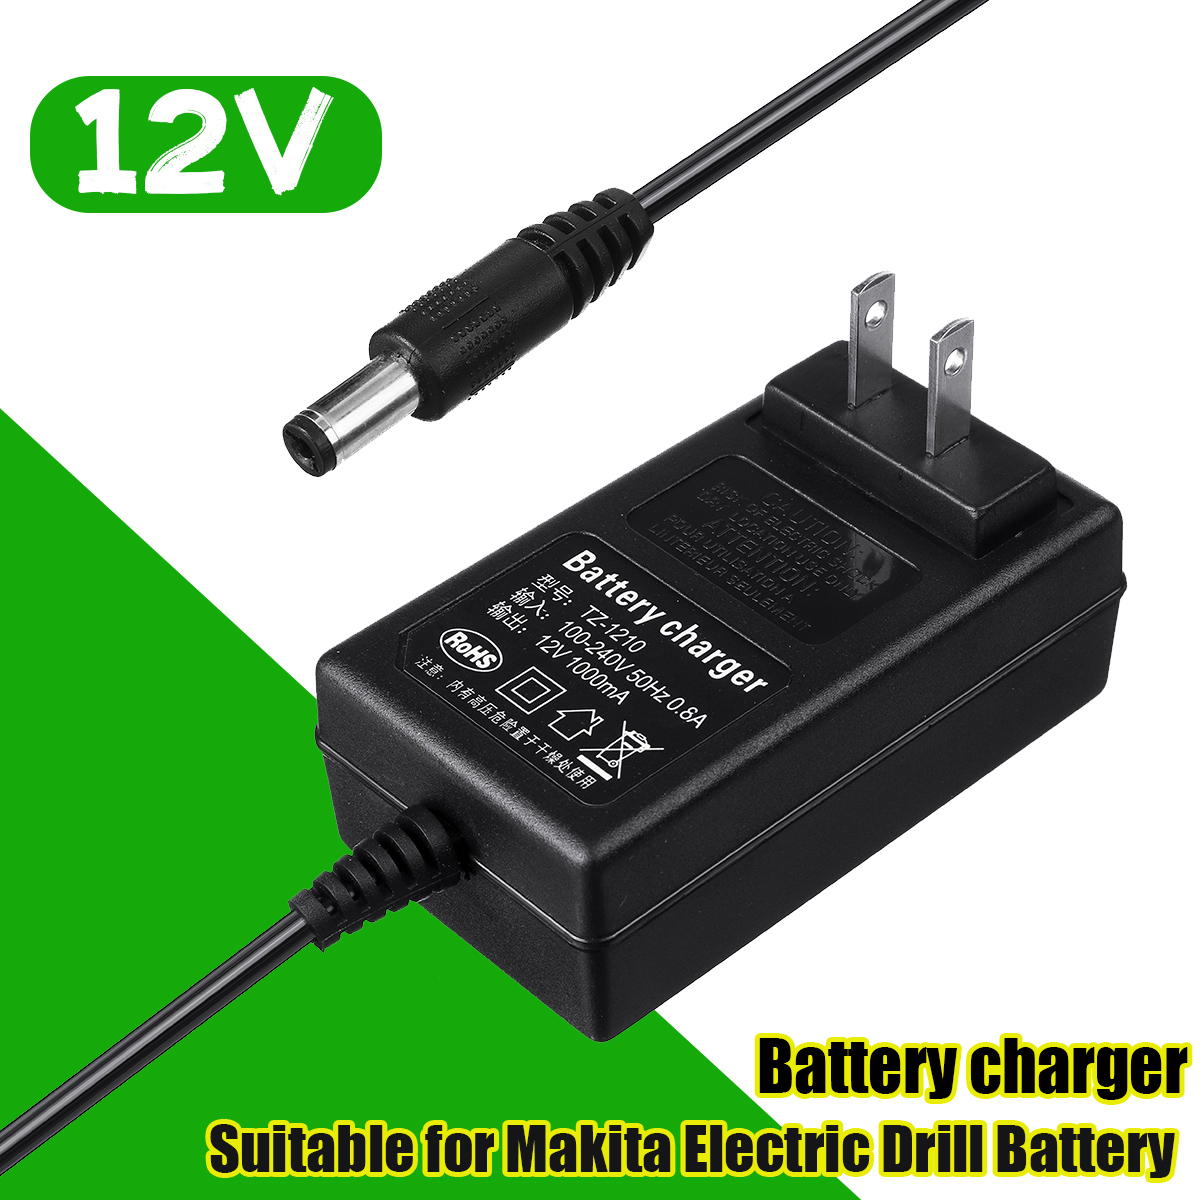 AC-100V-240V-50Hz-06A-Input-12V-1000mAh-Output-Battery-Charger-for-Makita-Electric-Drill-General-Bat-1794719-1